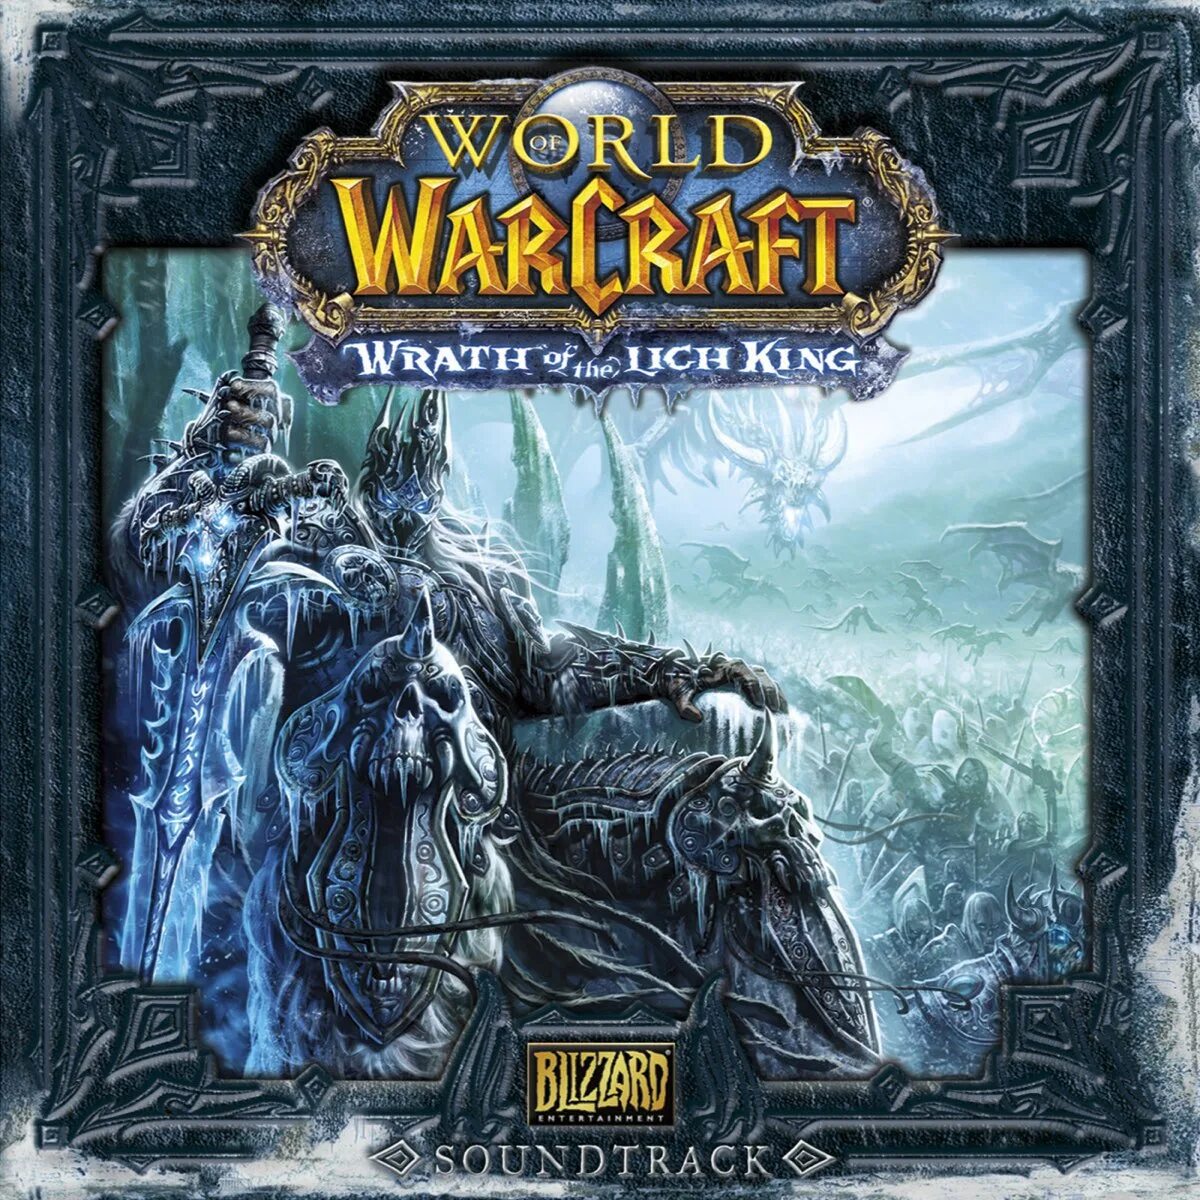 The original king. Wow lich King обложка. World of Warcraft Wrath. Warcraft Wrath of the lich King. Варкрафт Wrath of the lich King.